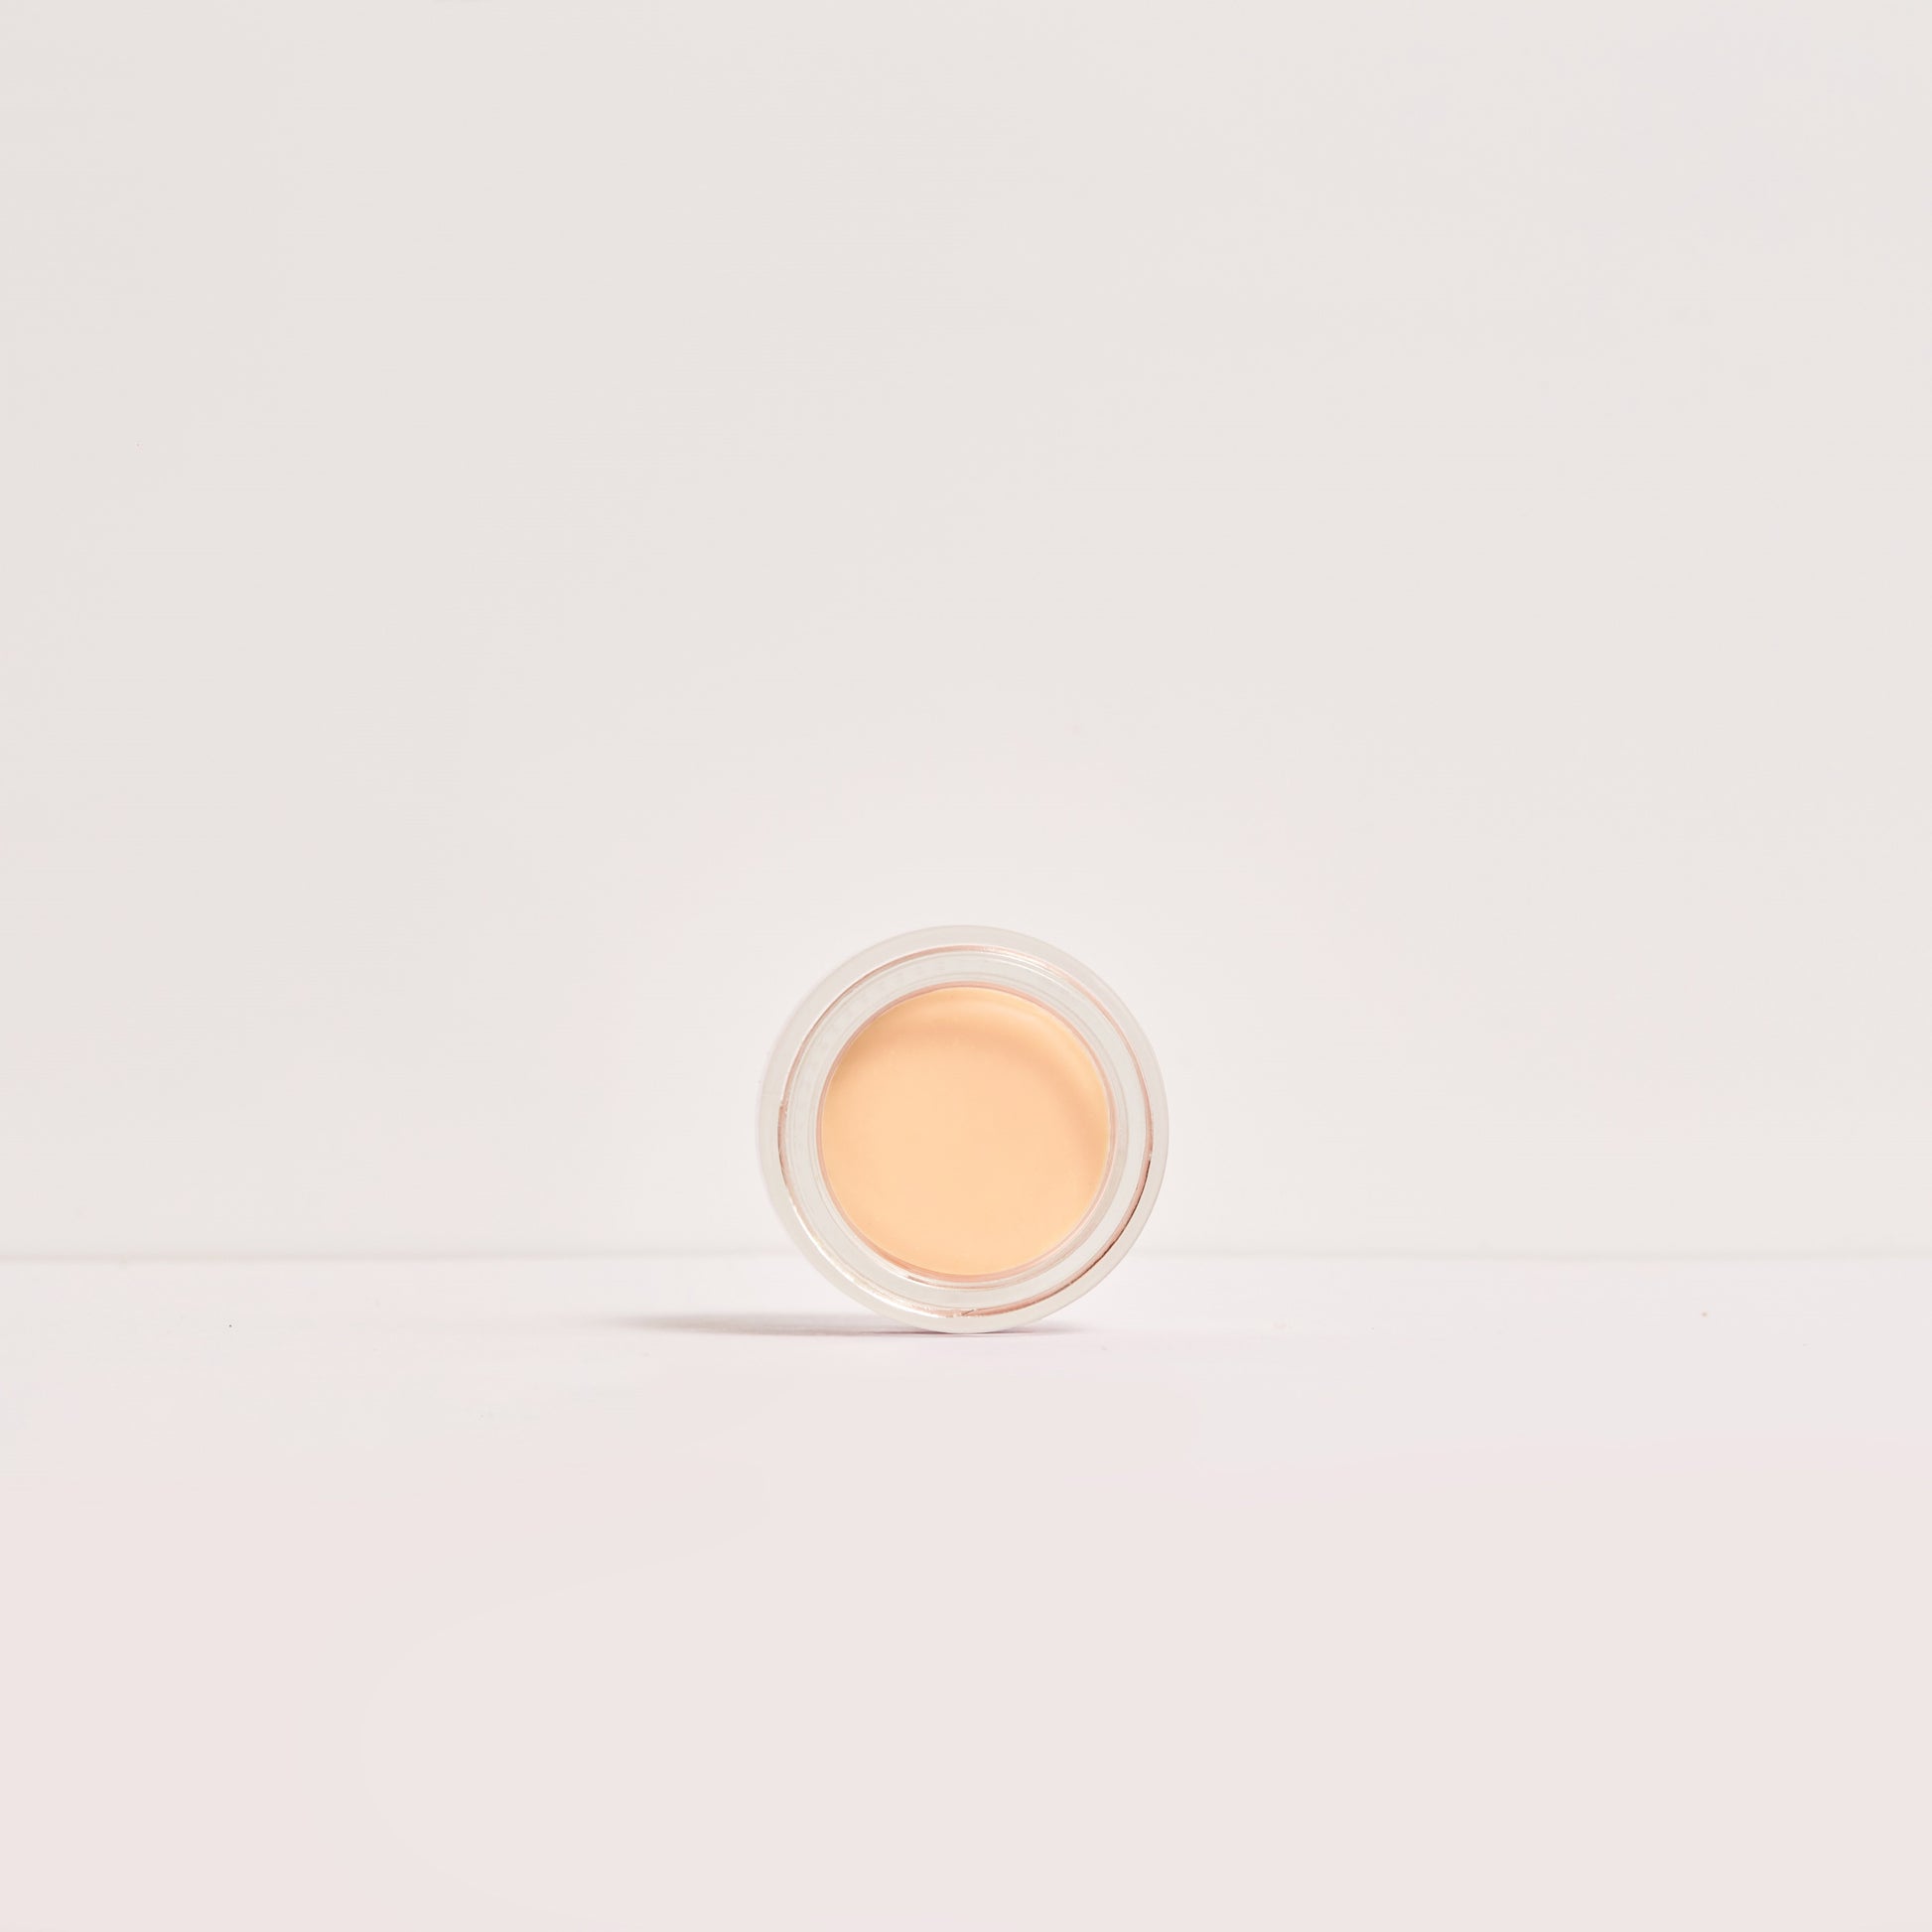 OMni Radiant Zinc Sheer Coral natural multi-use balm for dry lips and skin, highlighter on cheeks #7